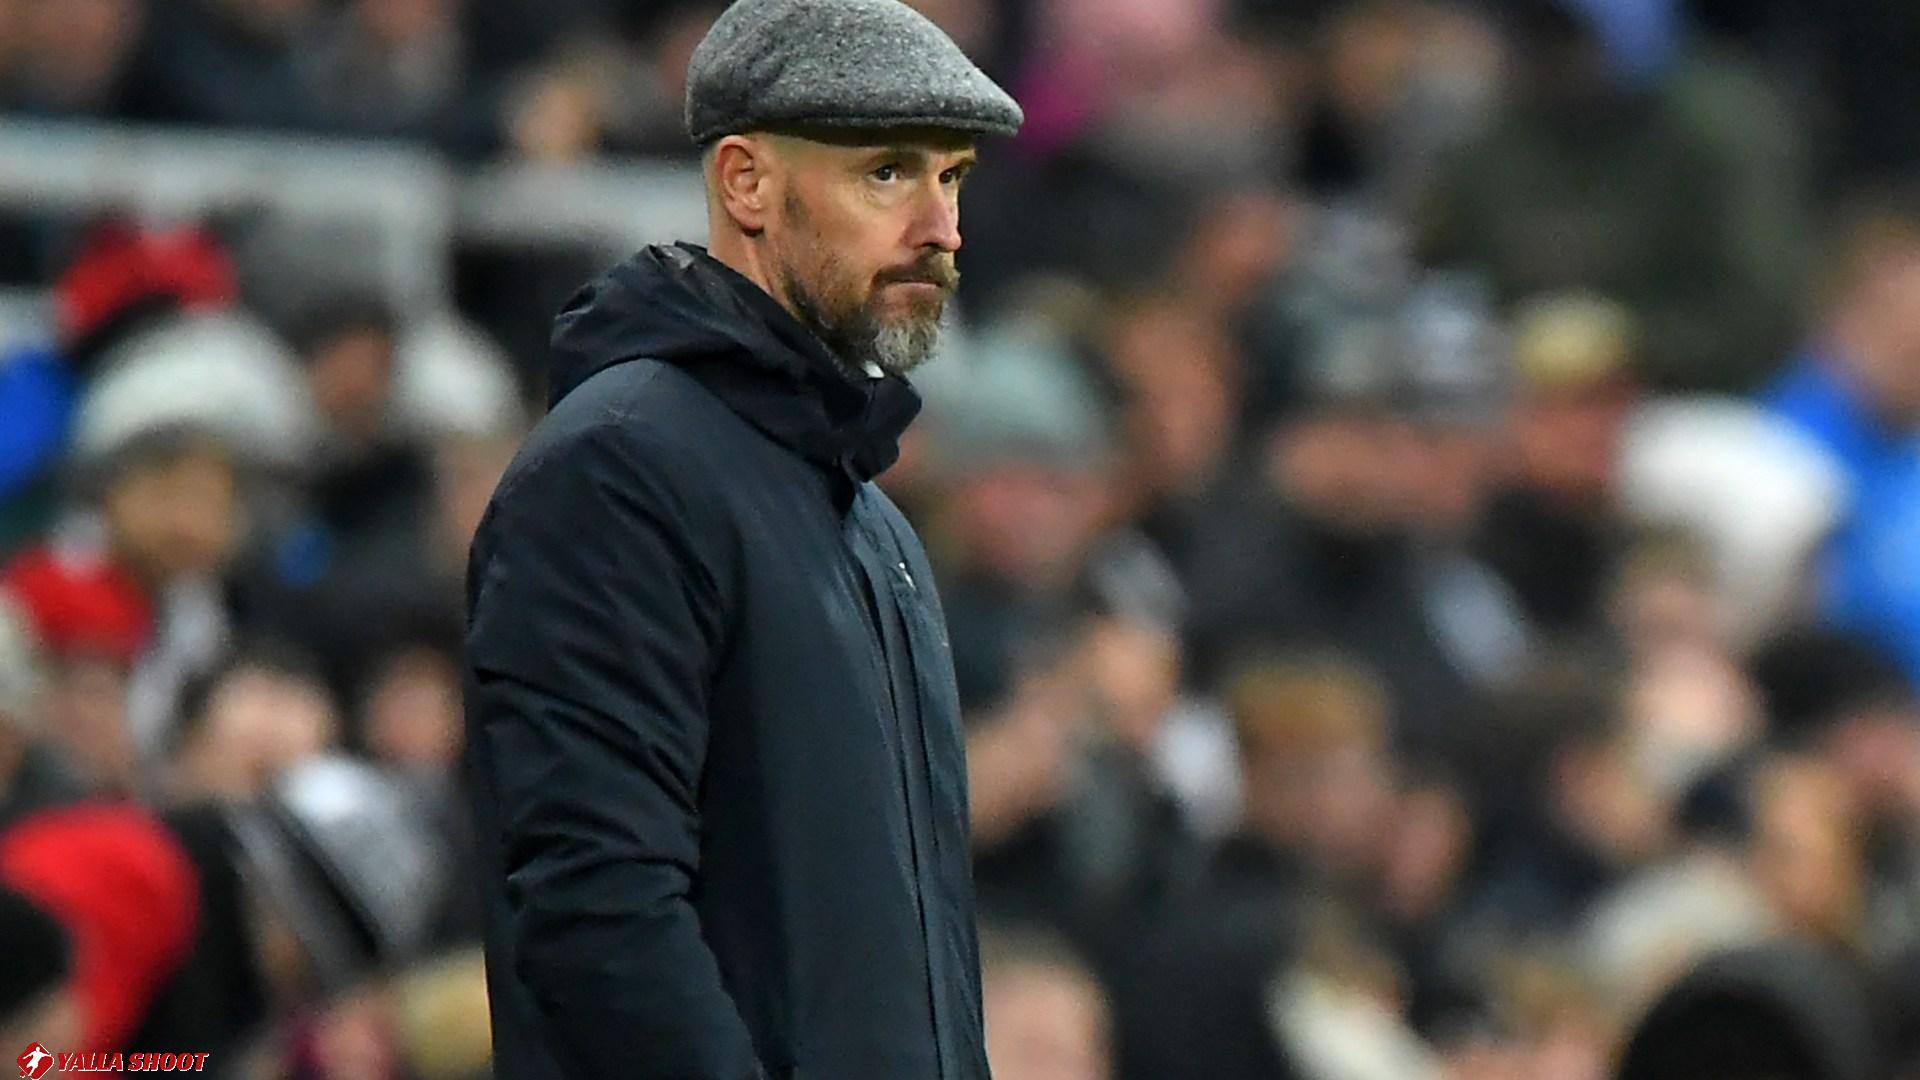 Arsenal legend Paul Merson predicts exact date when Erik ten Hag will be sacked by Man Utd